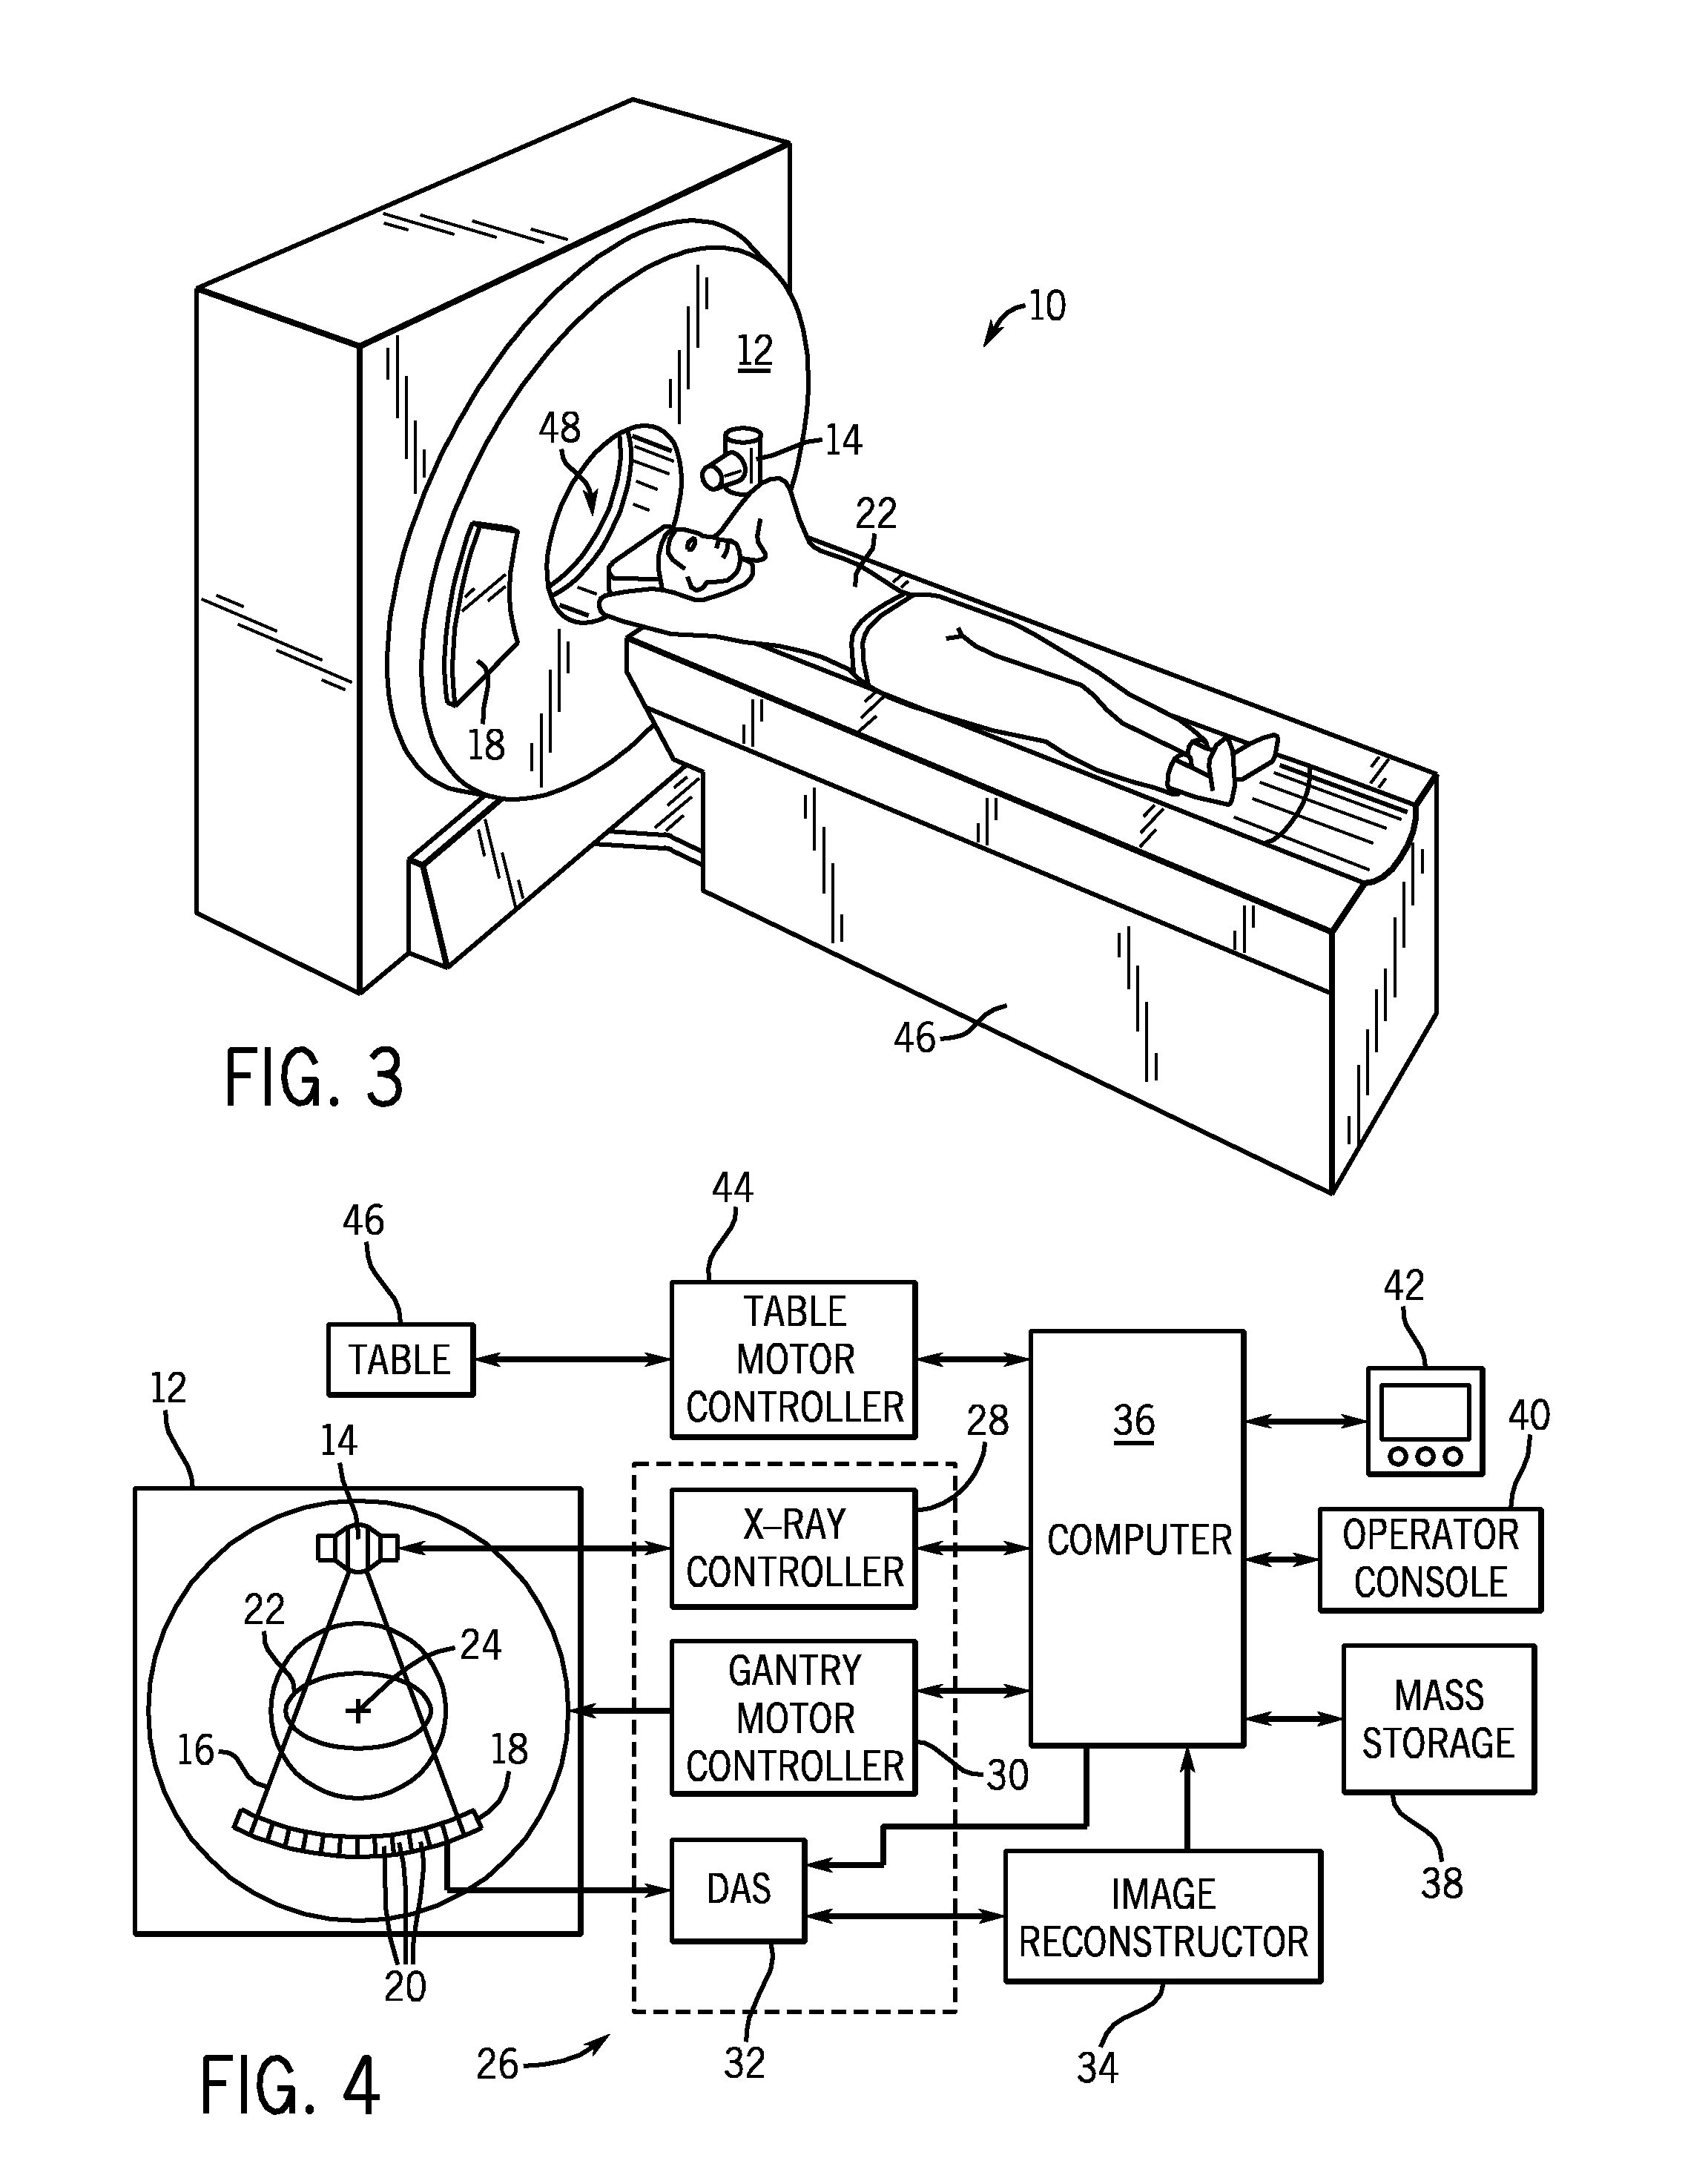 Deflection-equipped ct system with non-rectangular detector cells